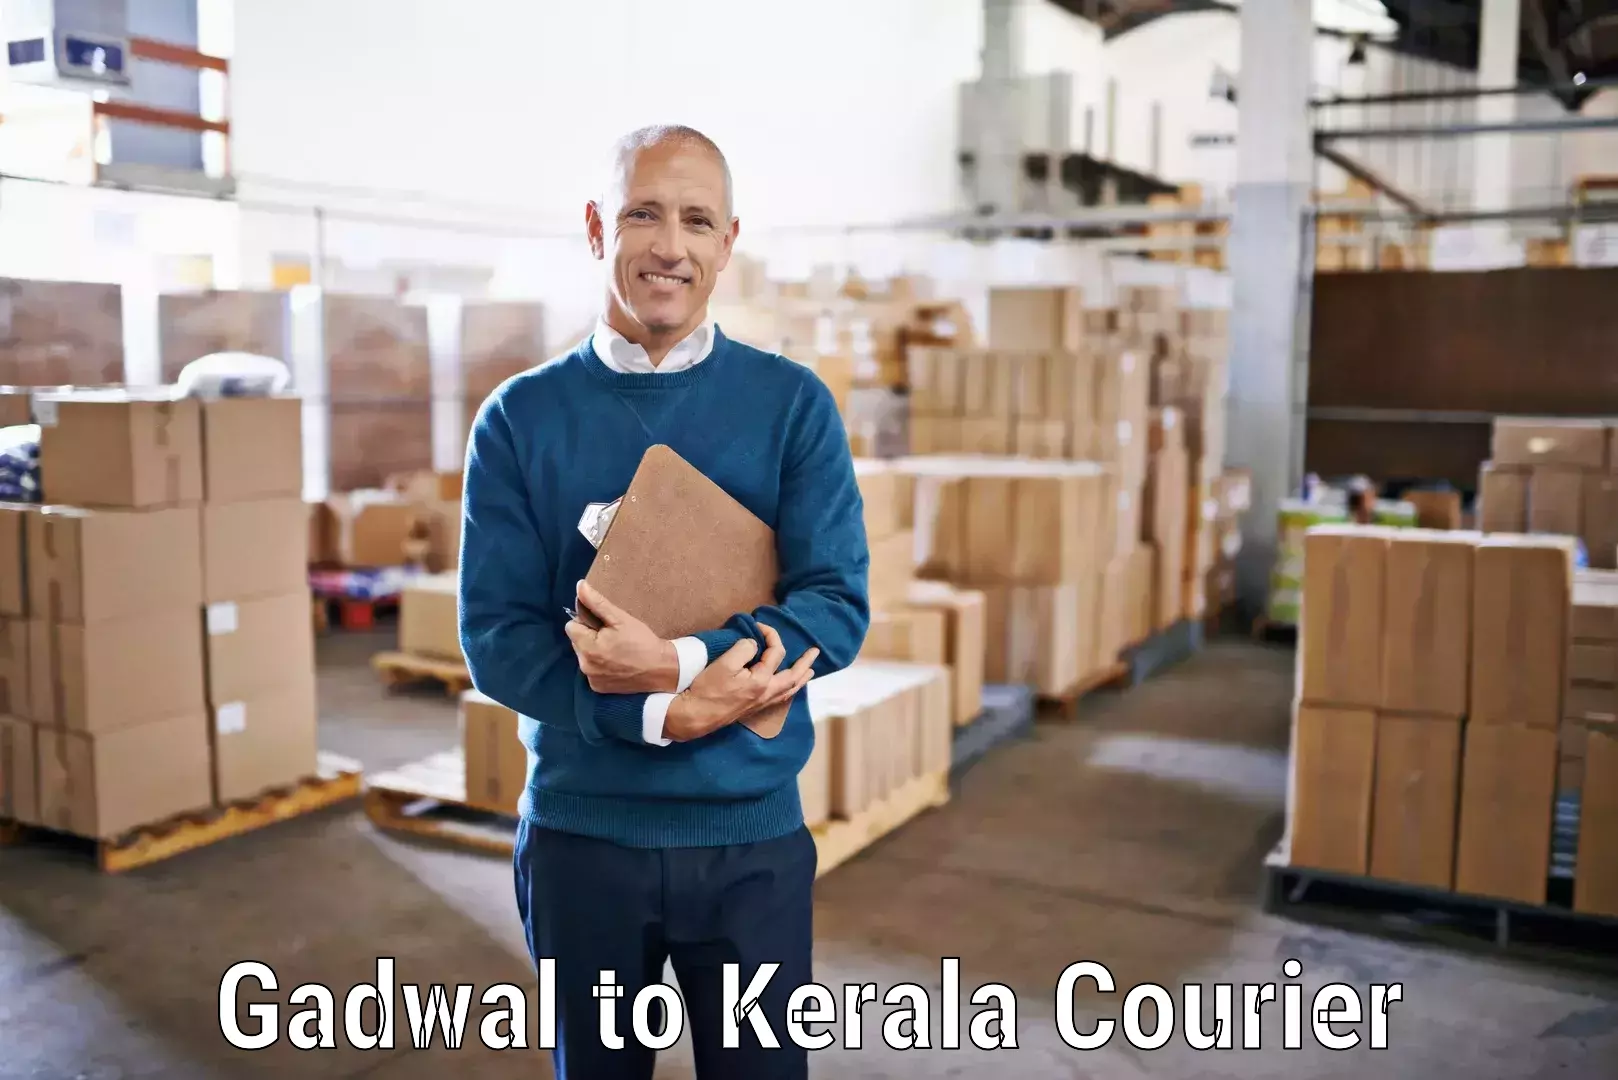 Cargo delivery service Gadwal to Kochi